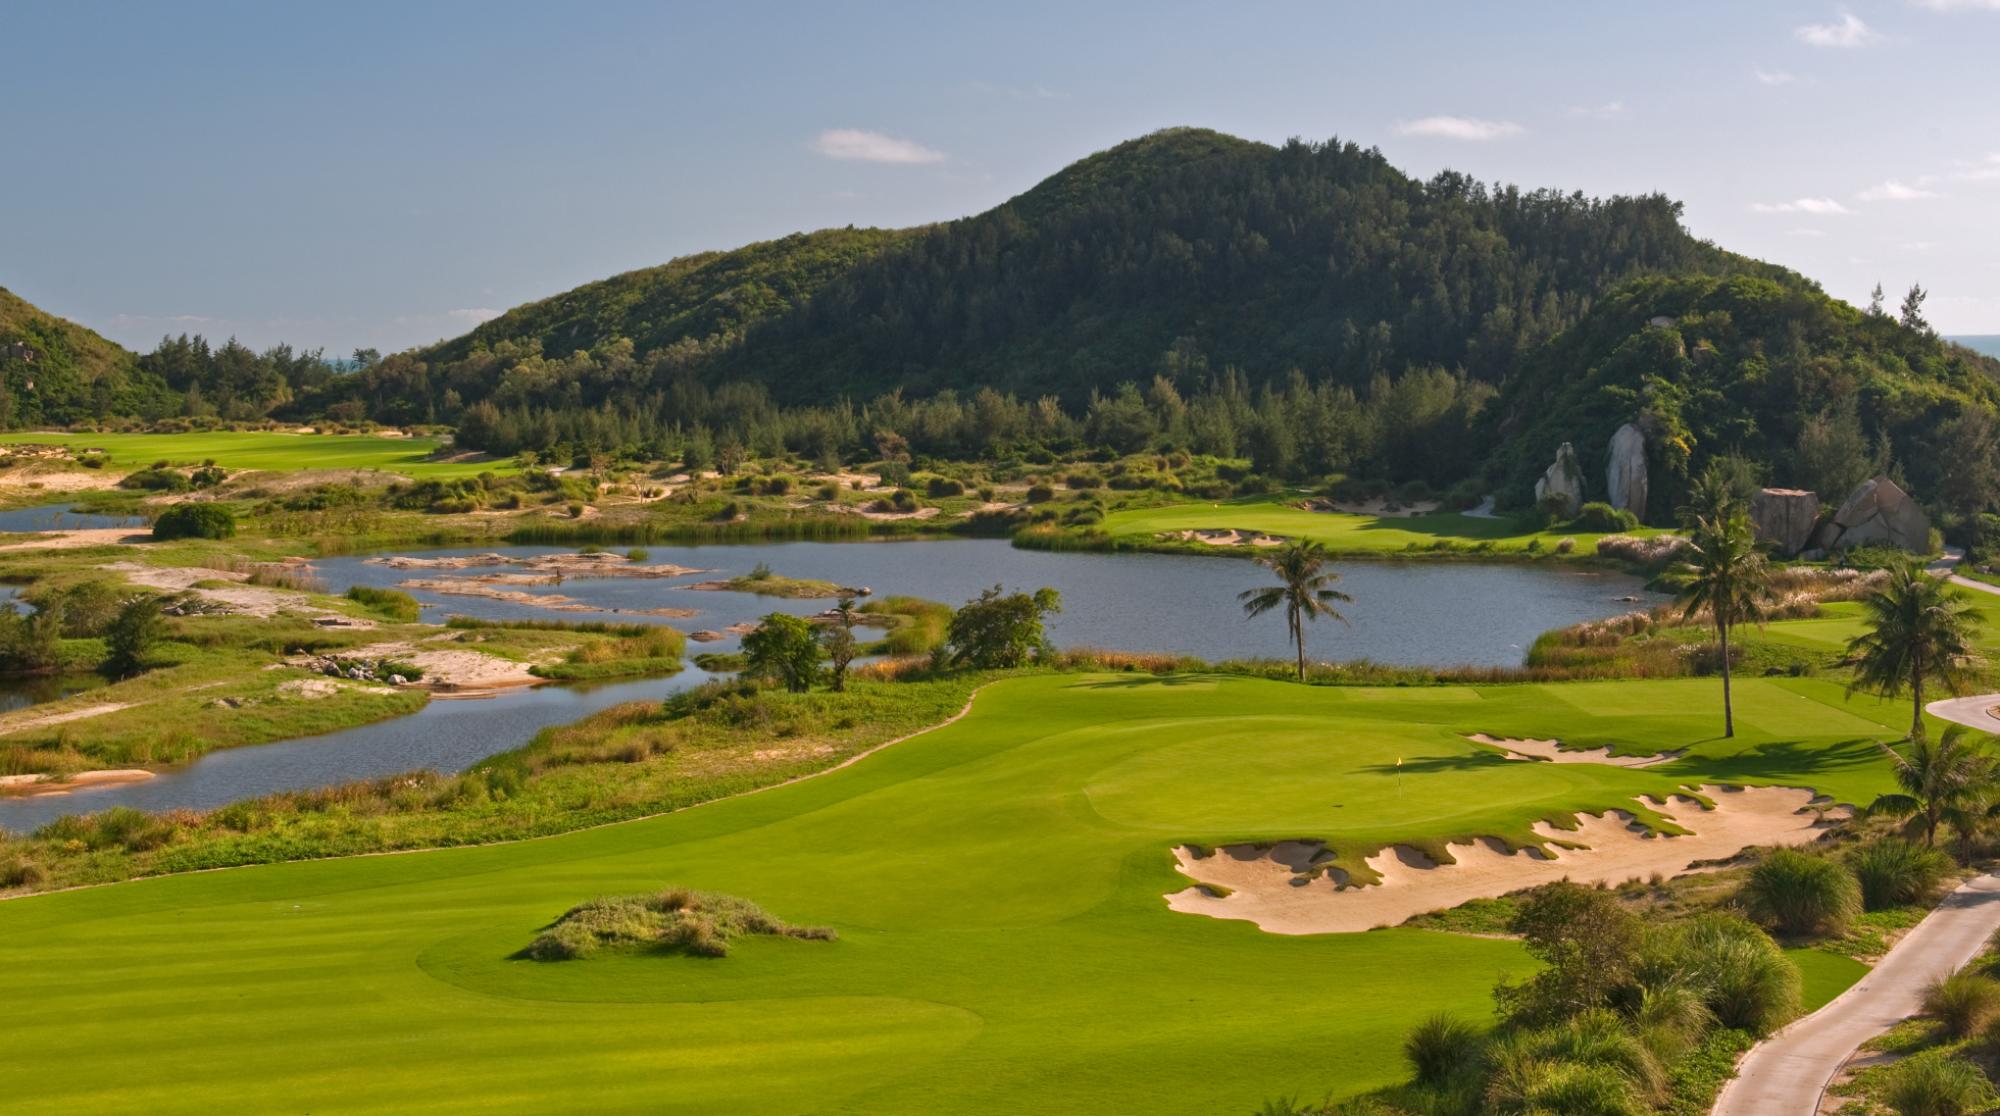 The Dunes at Shenzhou Peninsula has some of the most desirable golf course around China